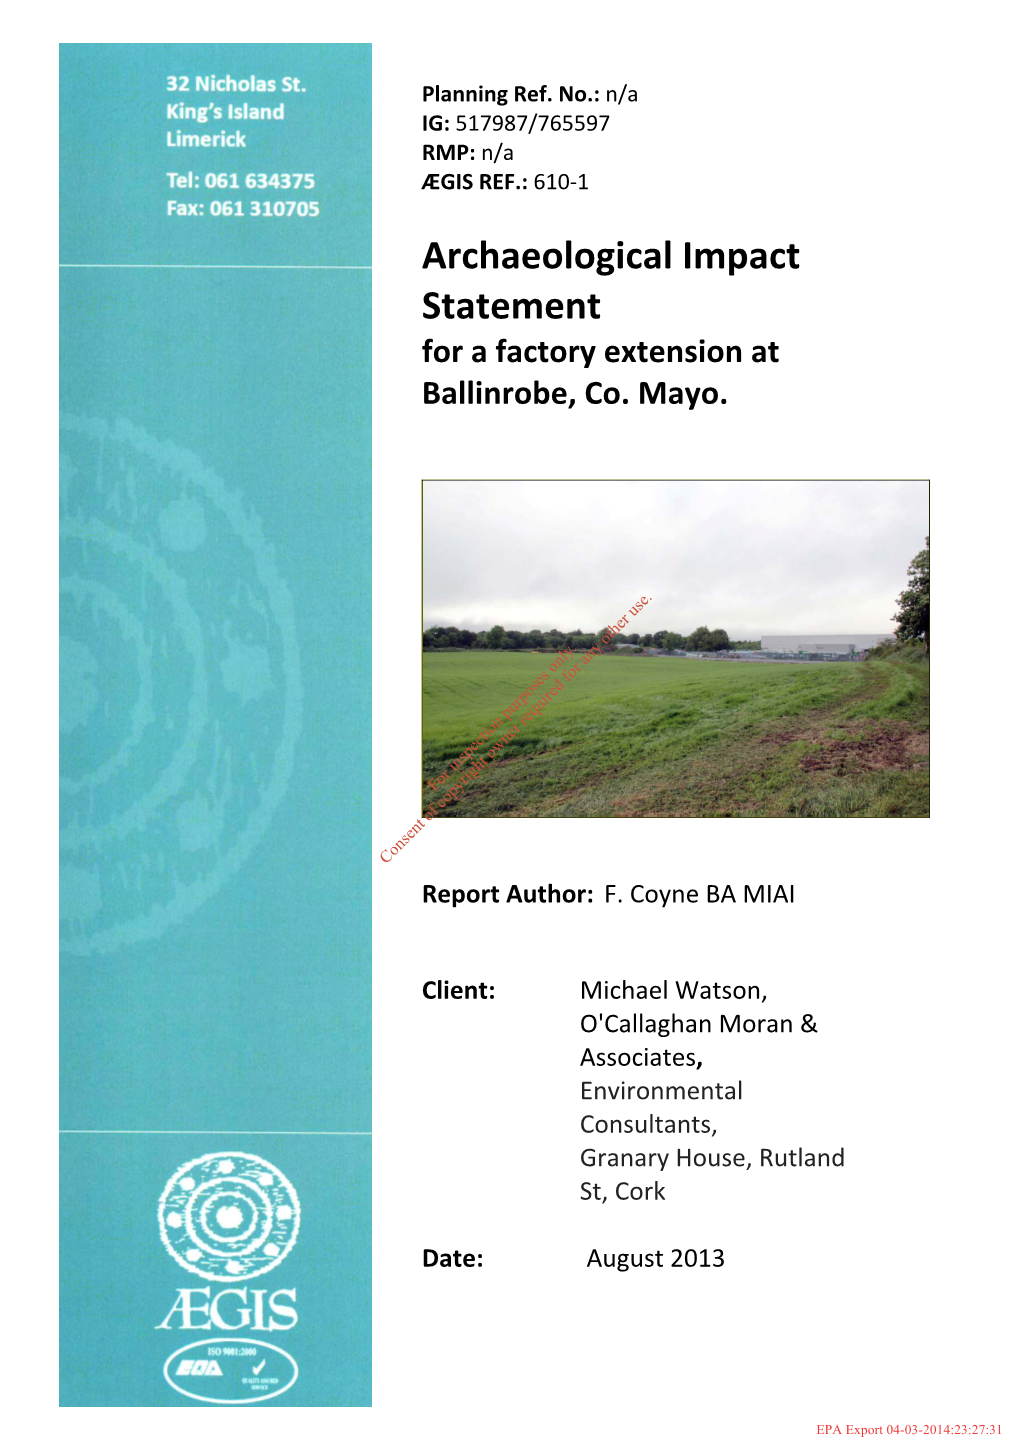 Archaeological Impact Statement for a Factory Extension at Ballinrobe, Co